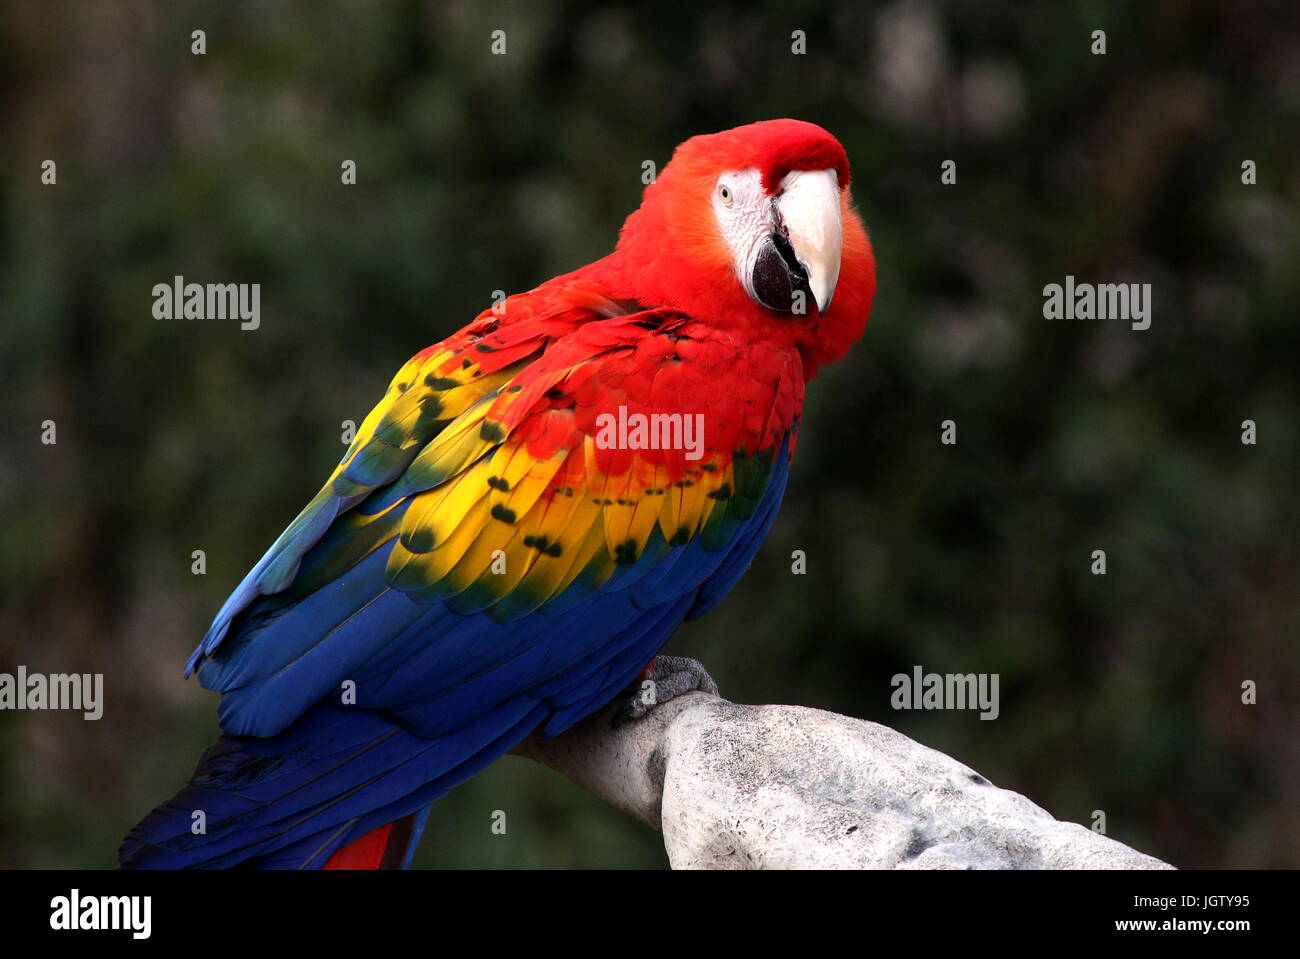 South American Scarlet macaw (Ara macao) Stock Photo